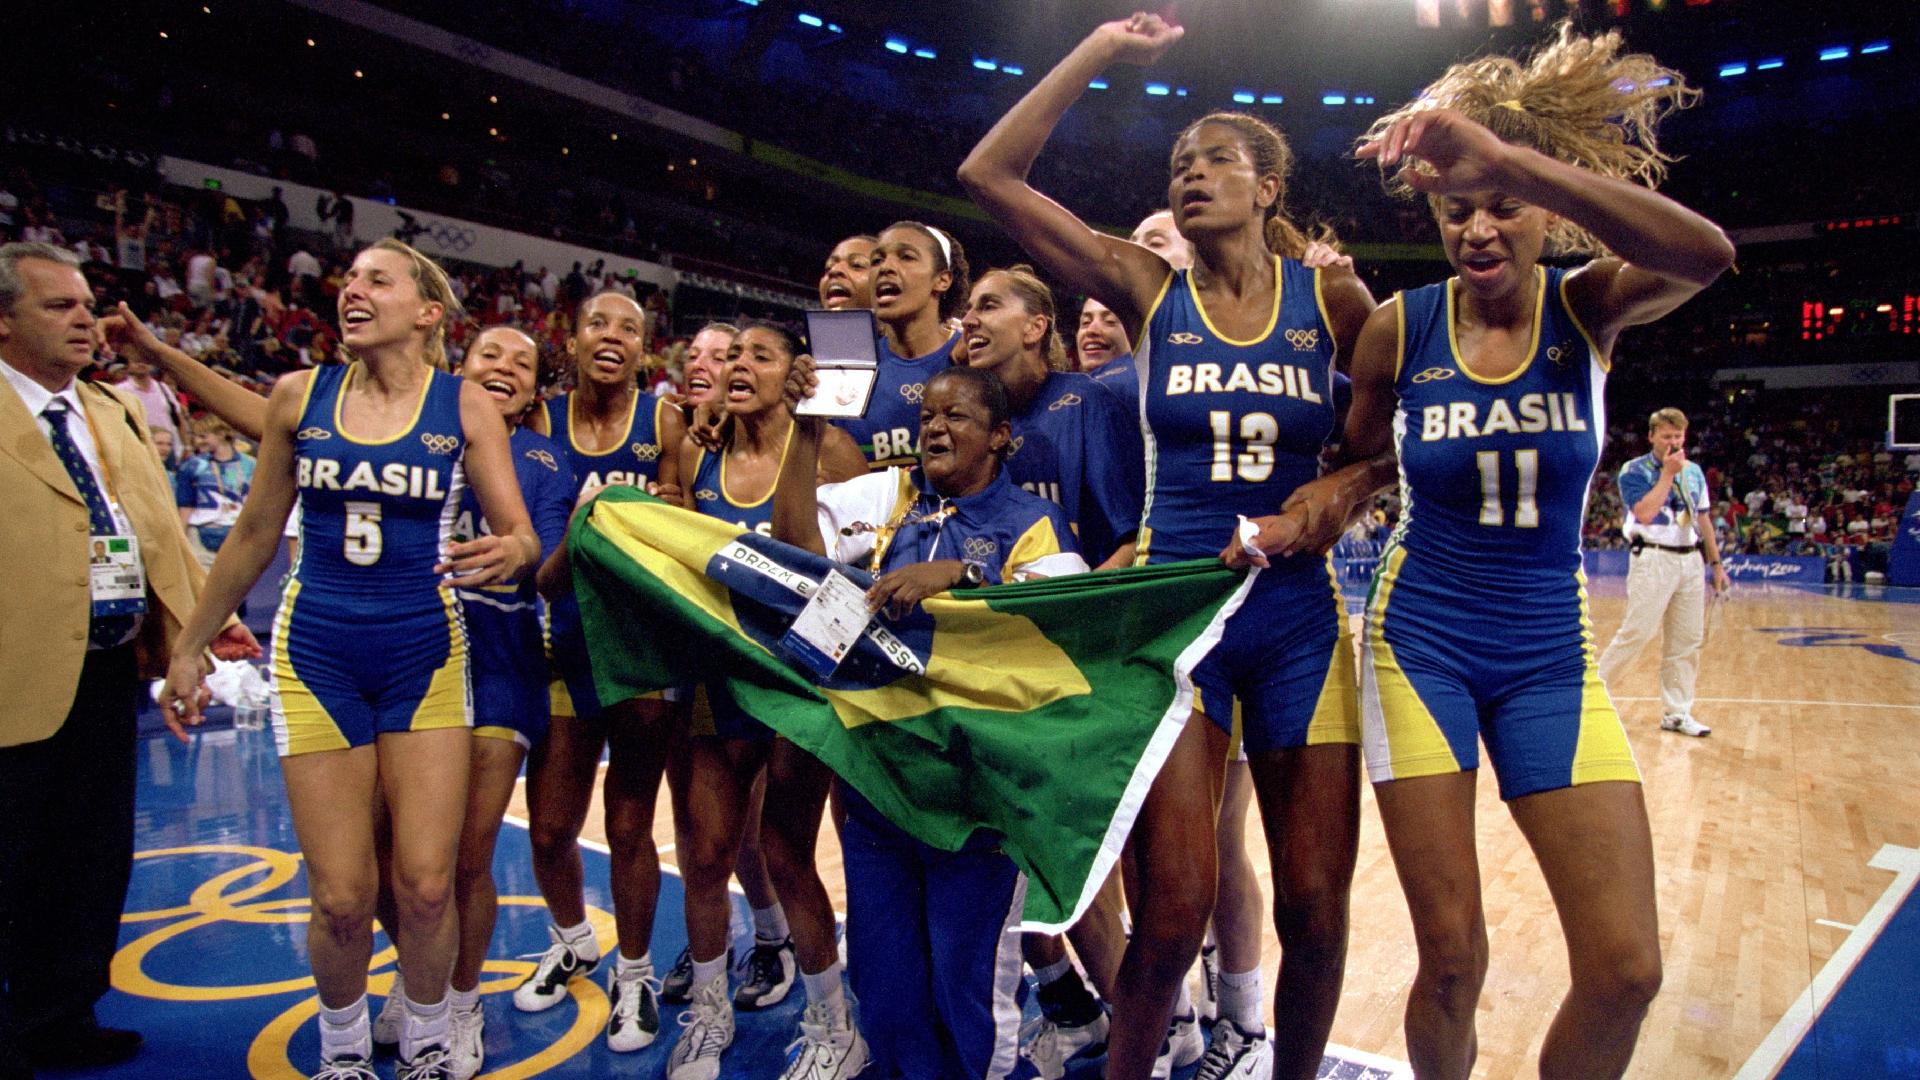 SYDNEY - SEPTEMBER 30: Team Brazil celebrates capturing the bronze after the women's basketball medal game against Korea at the Sydney SuperDome during the Sydney Olympic Games in Sydney, Australia on September 30, 2000. Brazil defeated Korea in overtime 84-73. (Photo by Jamie Squire /Getty Images) 